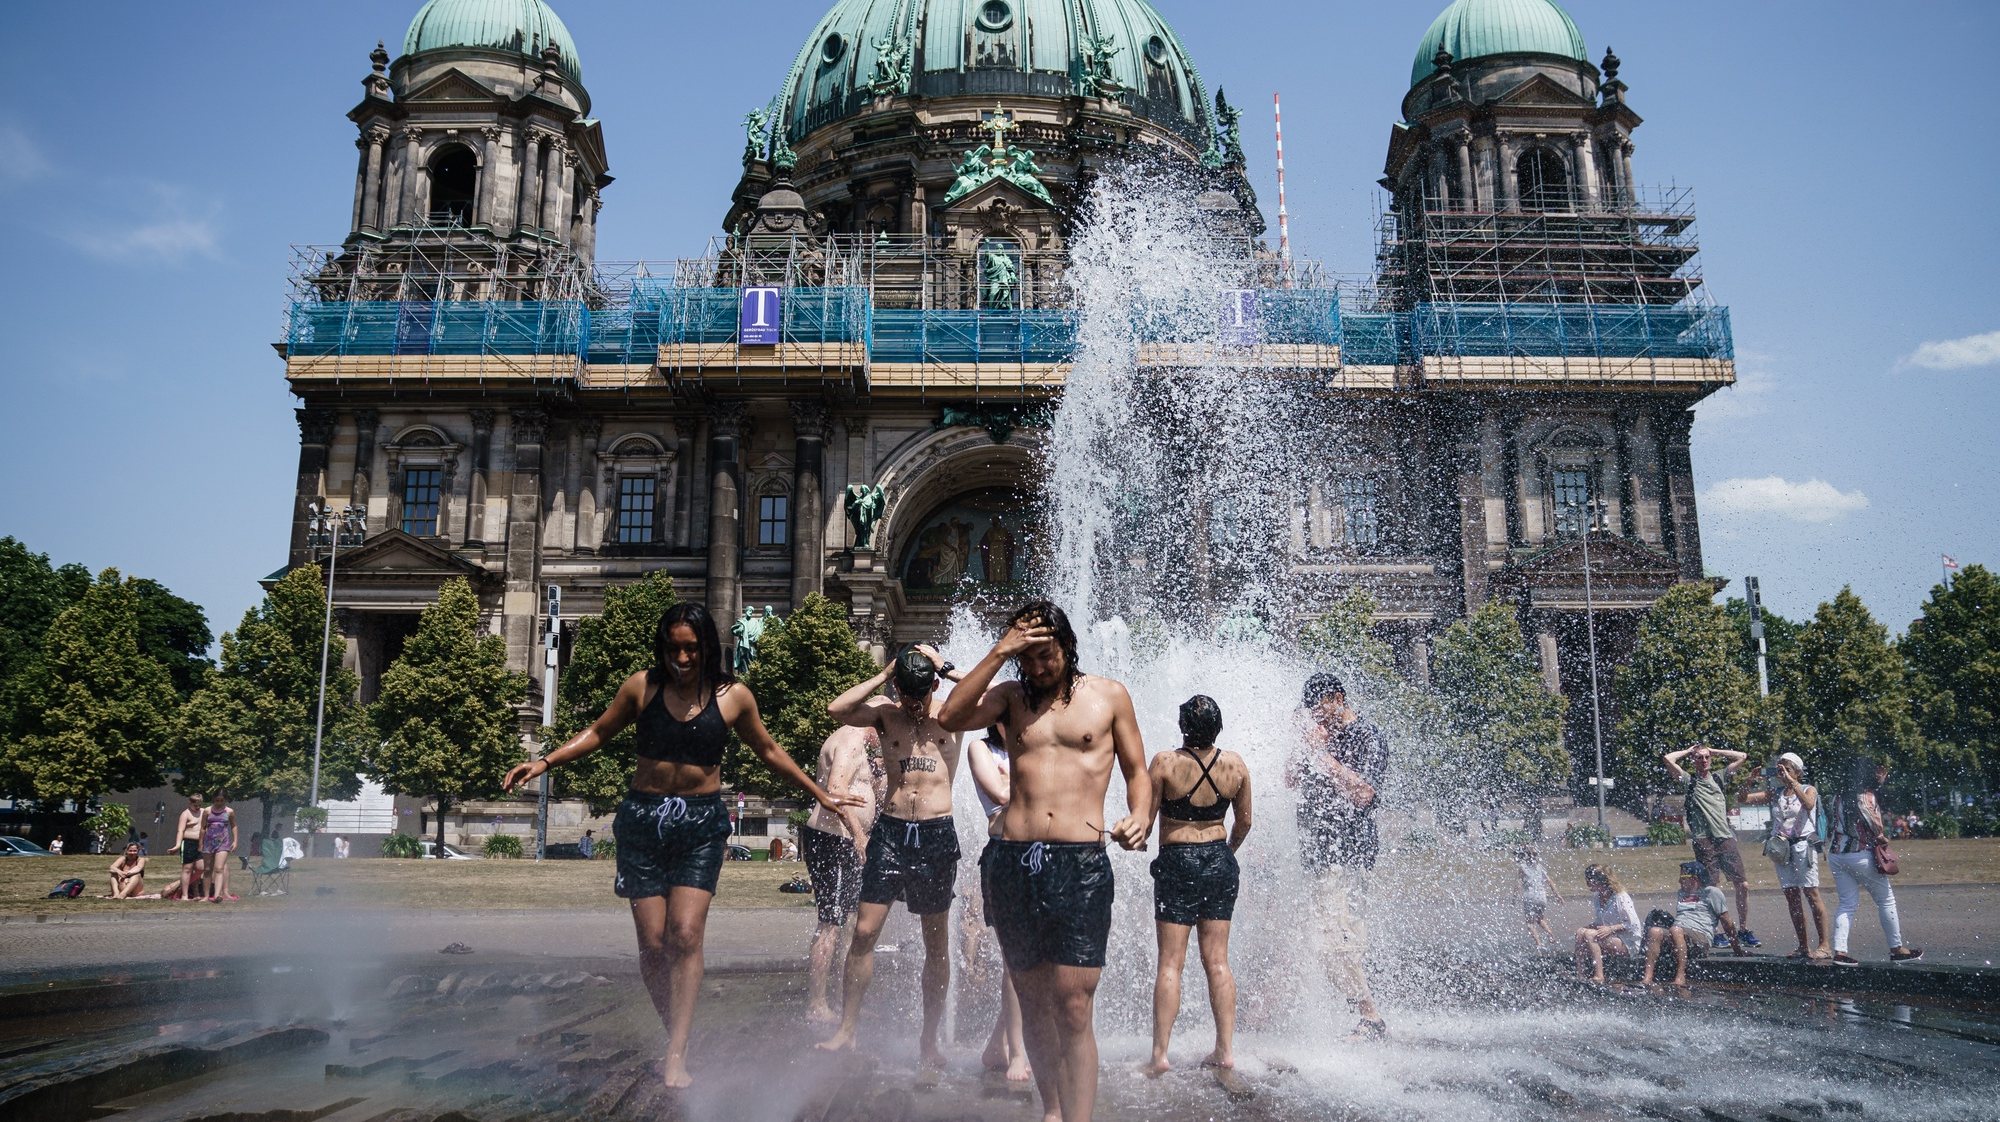 epa10022118 Tourists from the United States cool off in a fountain at Lustgarten park in Berlin, Germany, 19 June 2022. The German Weather Service (Deutscher Wetterdienst) warns of an early heatwave with highs of 38 degrees Celsius in Germany.  EPA/CLEMENS BILAN